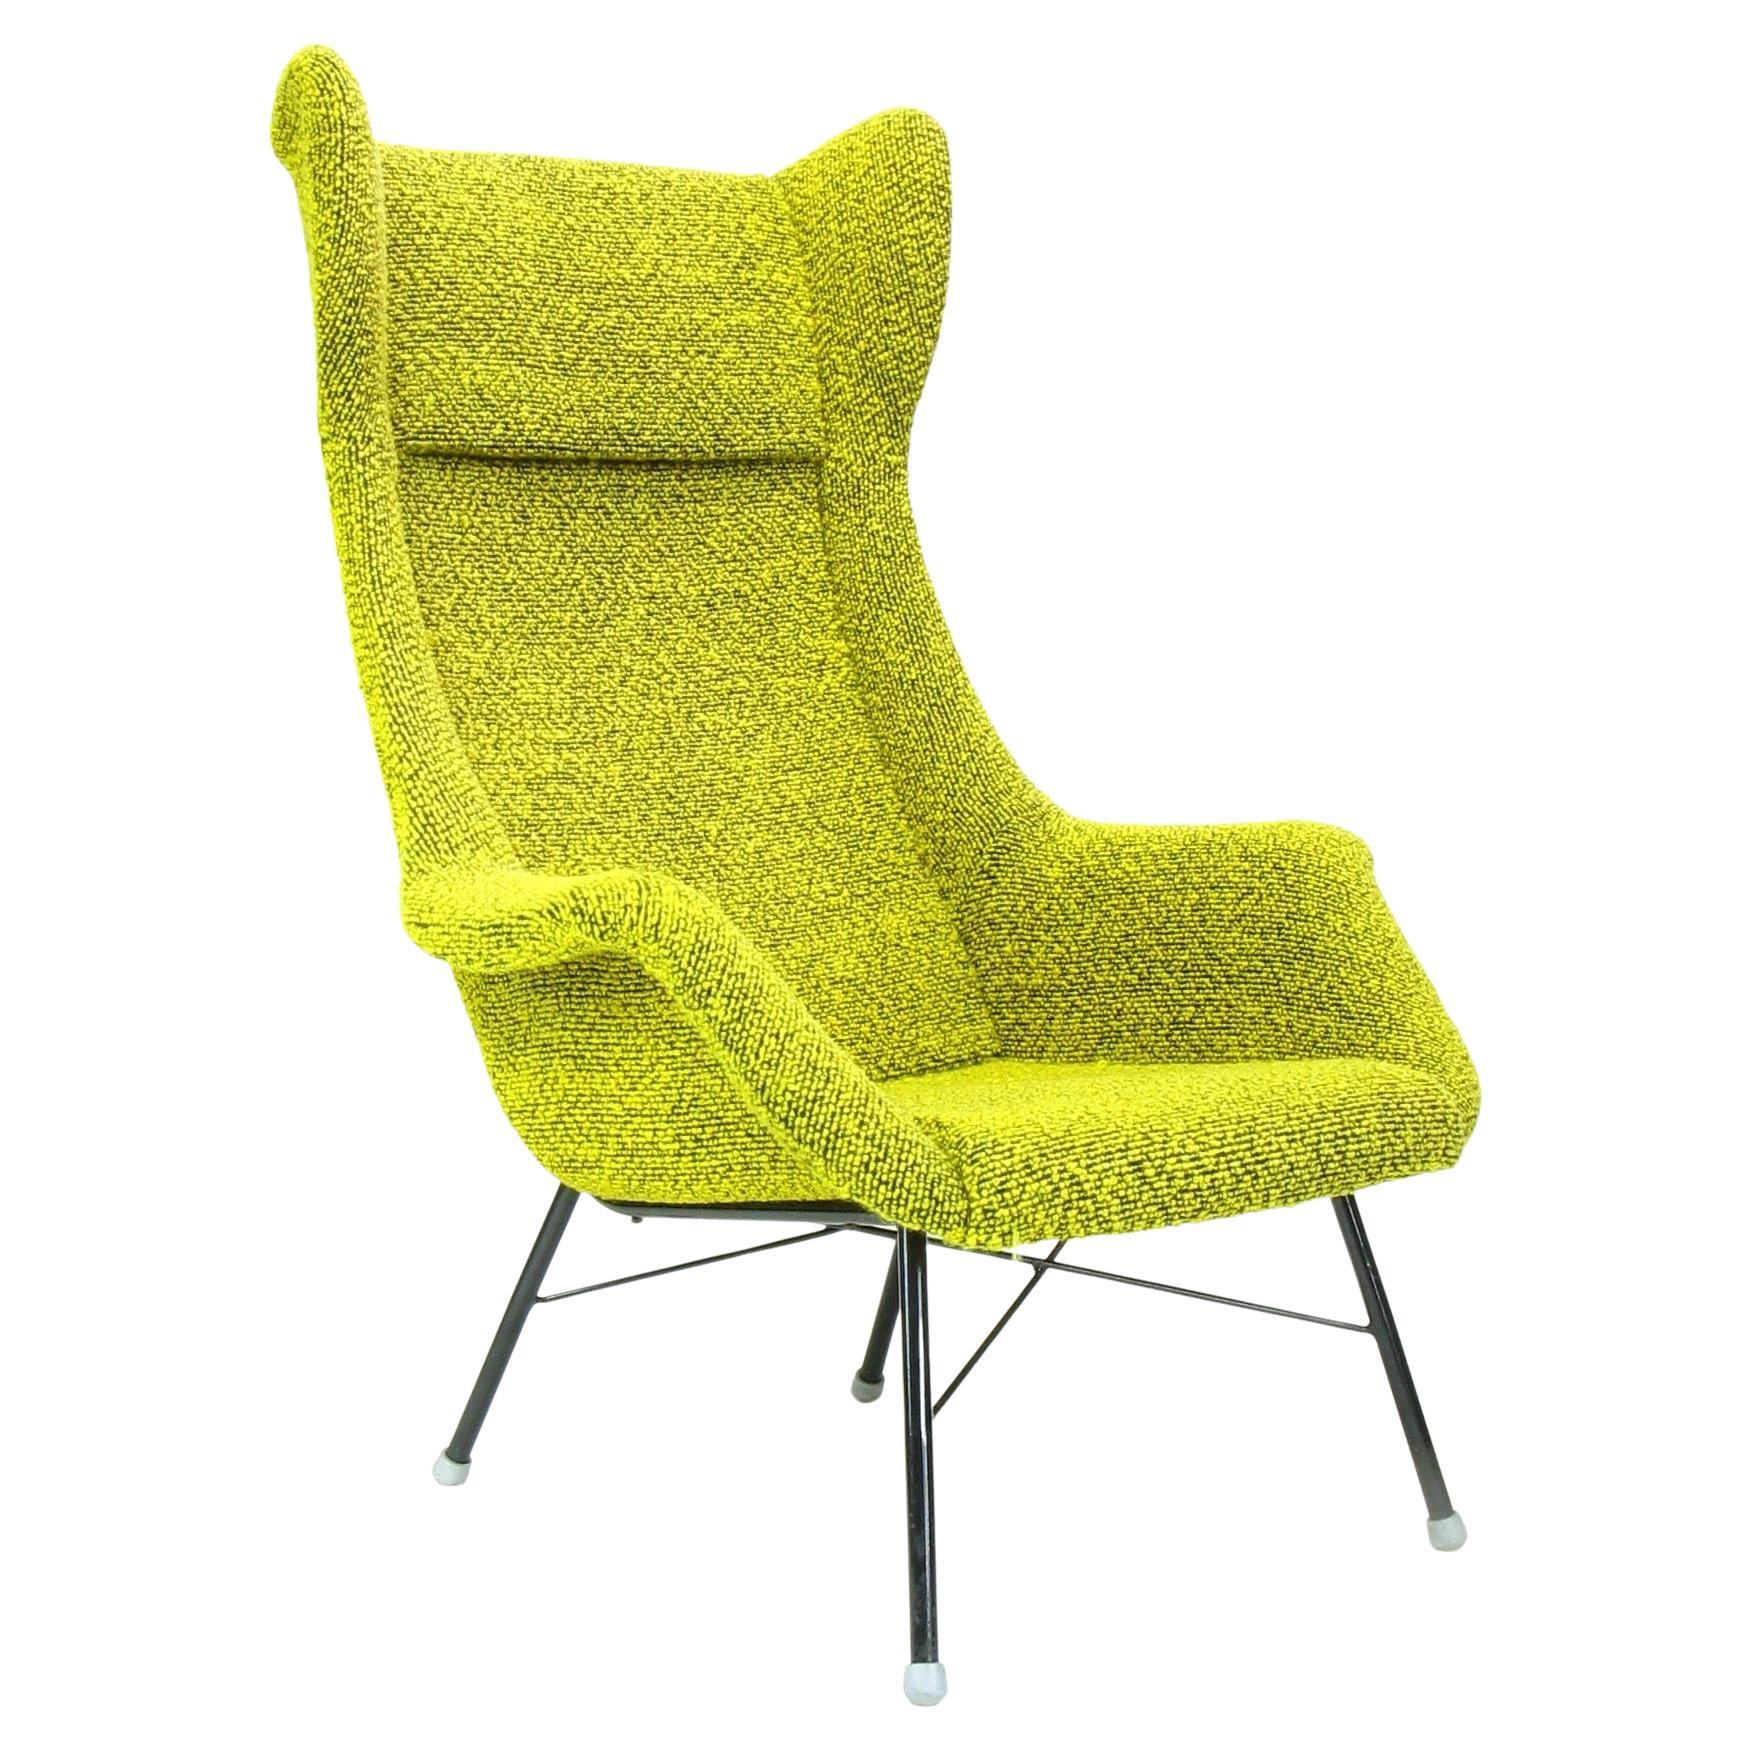 Yellow and Green Wingback Armchair by Miroslav Navratil for Ton, 1960s For Sale